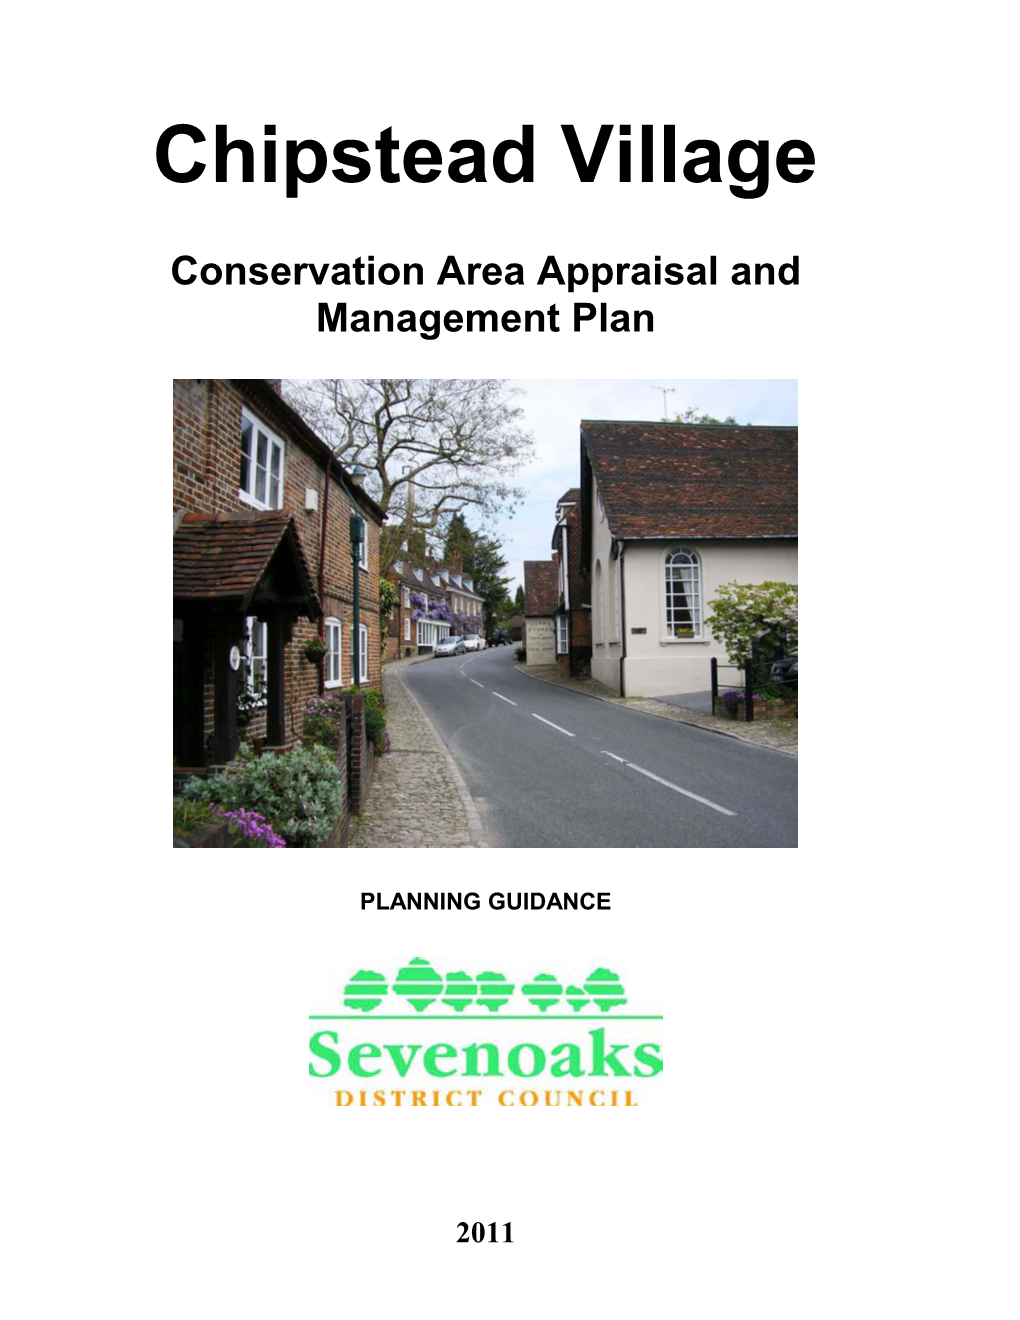 Chipstead Conservation Area Appraisal 1999